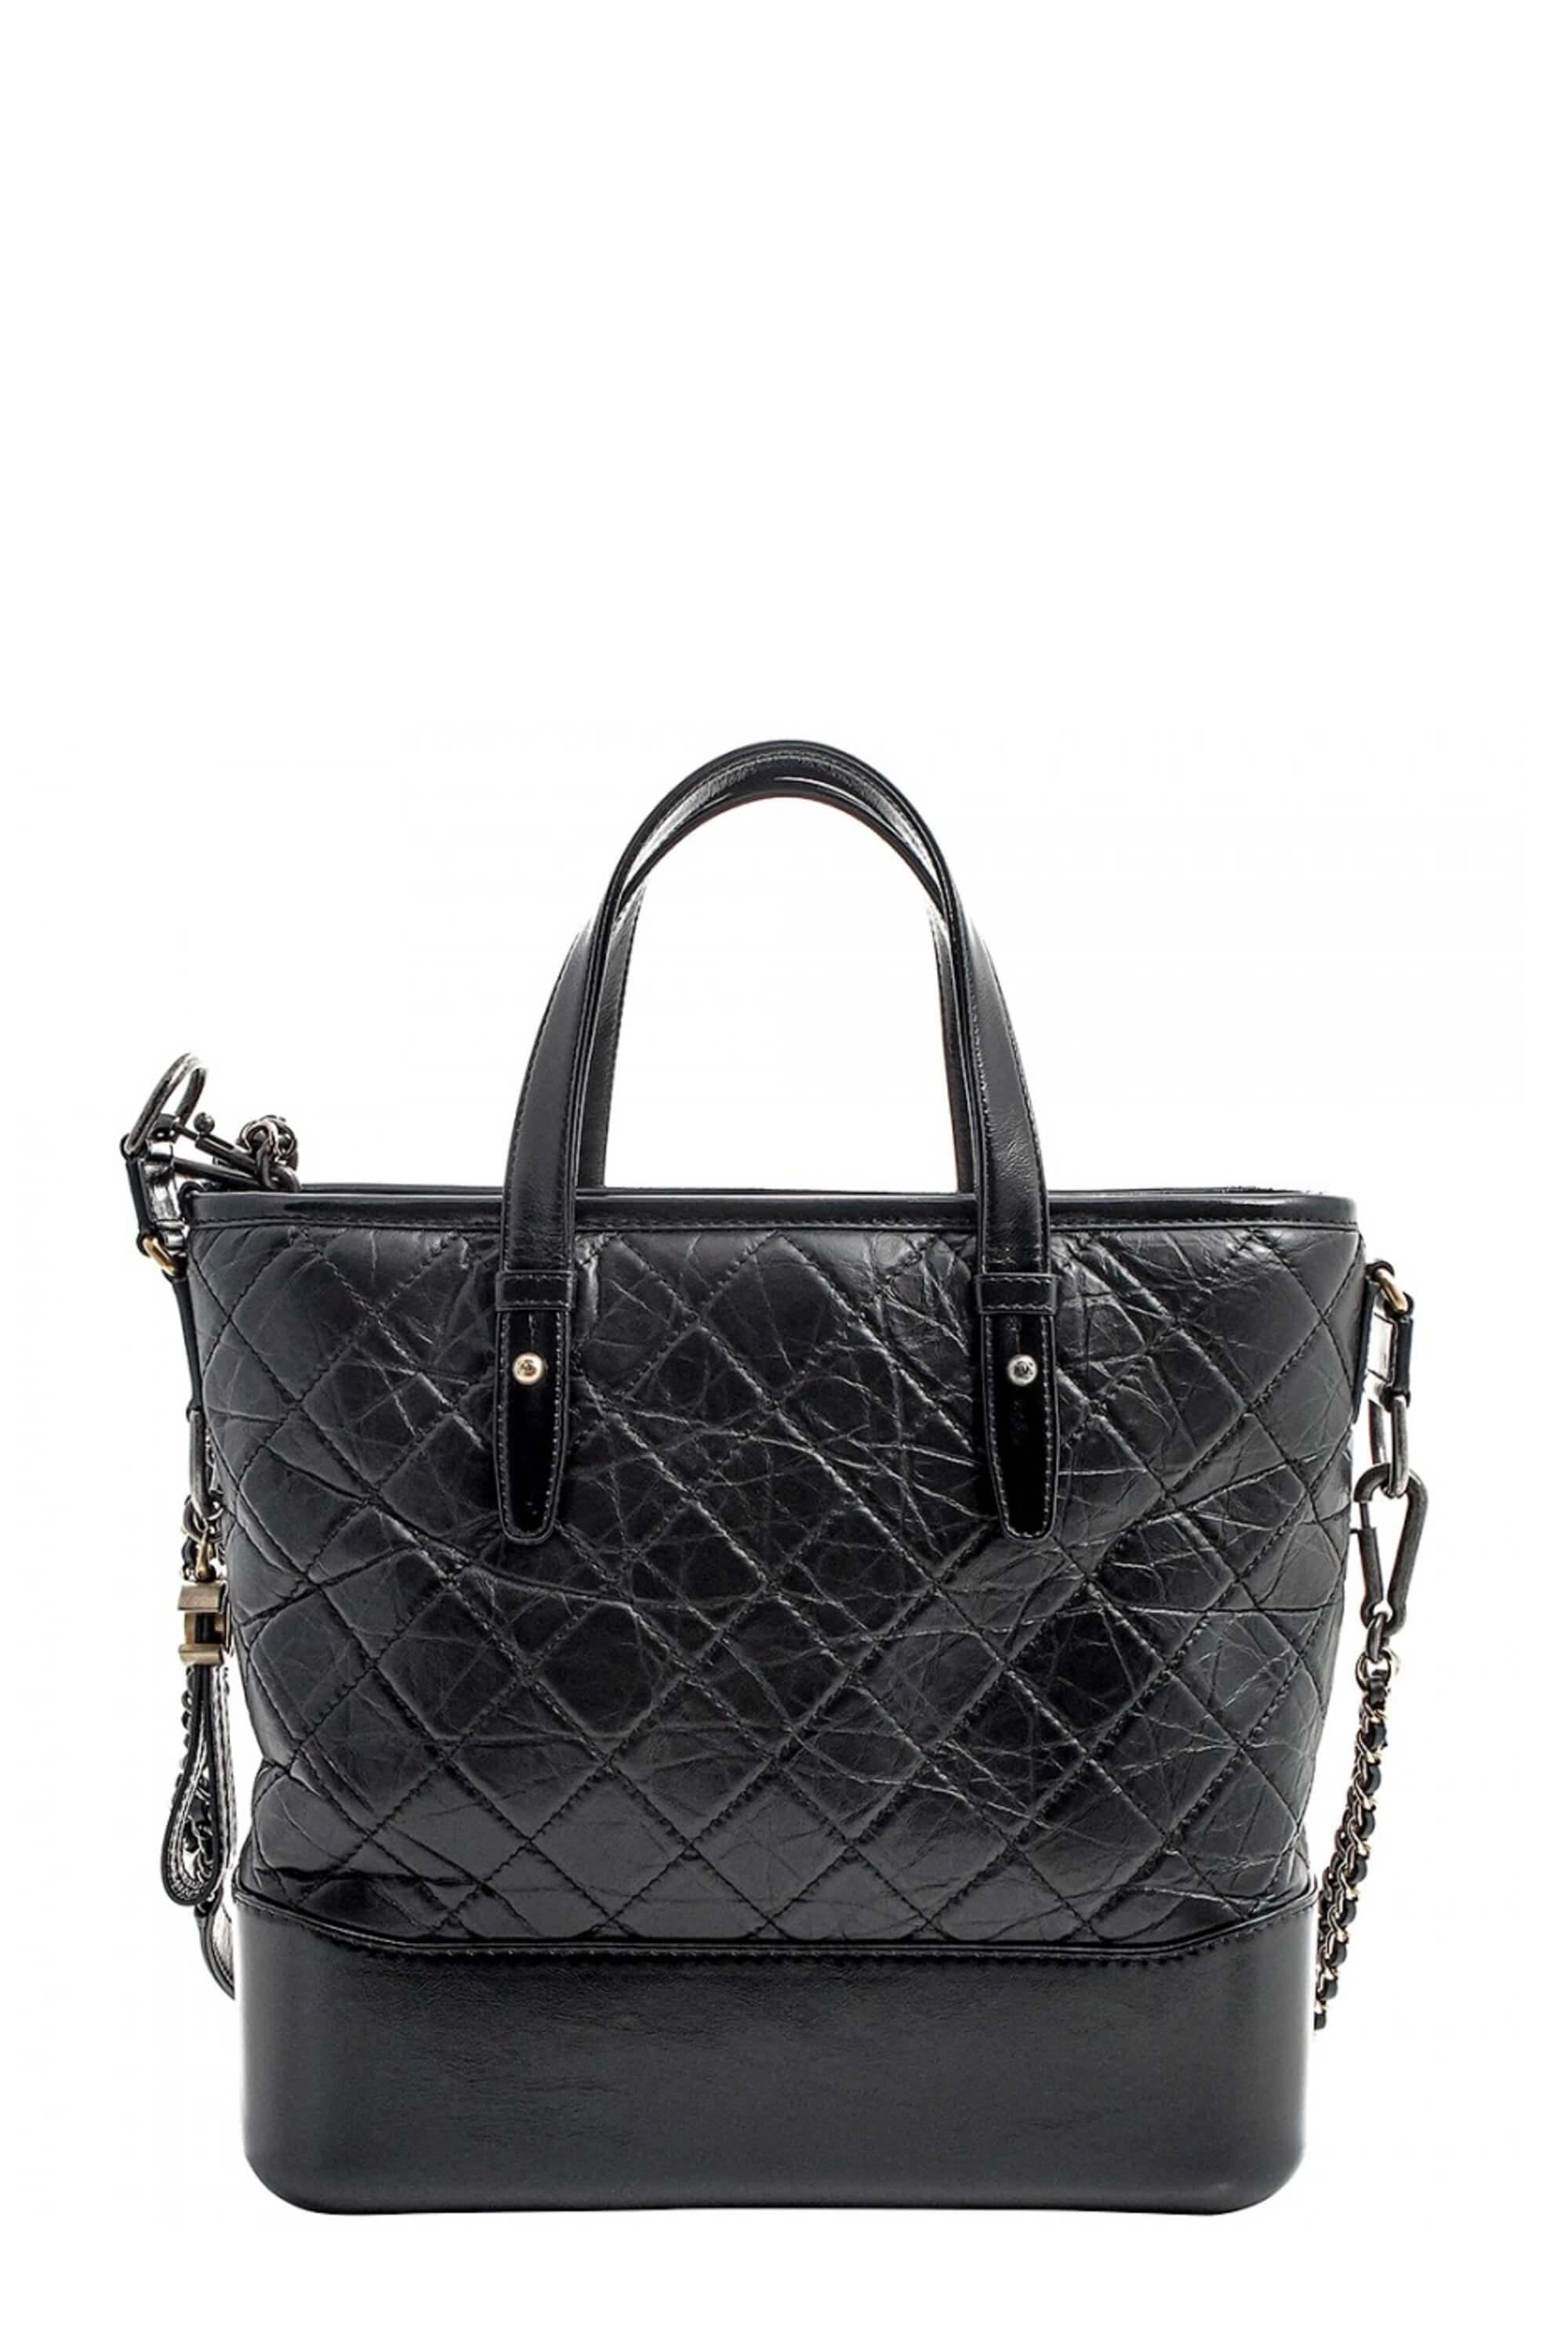 CHANEL Gabrielle Large Shopping Tote